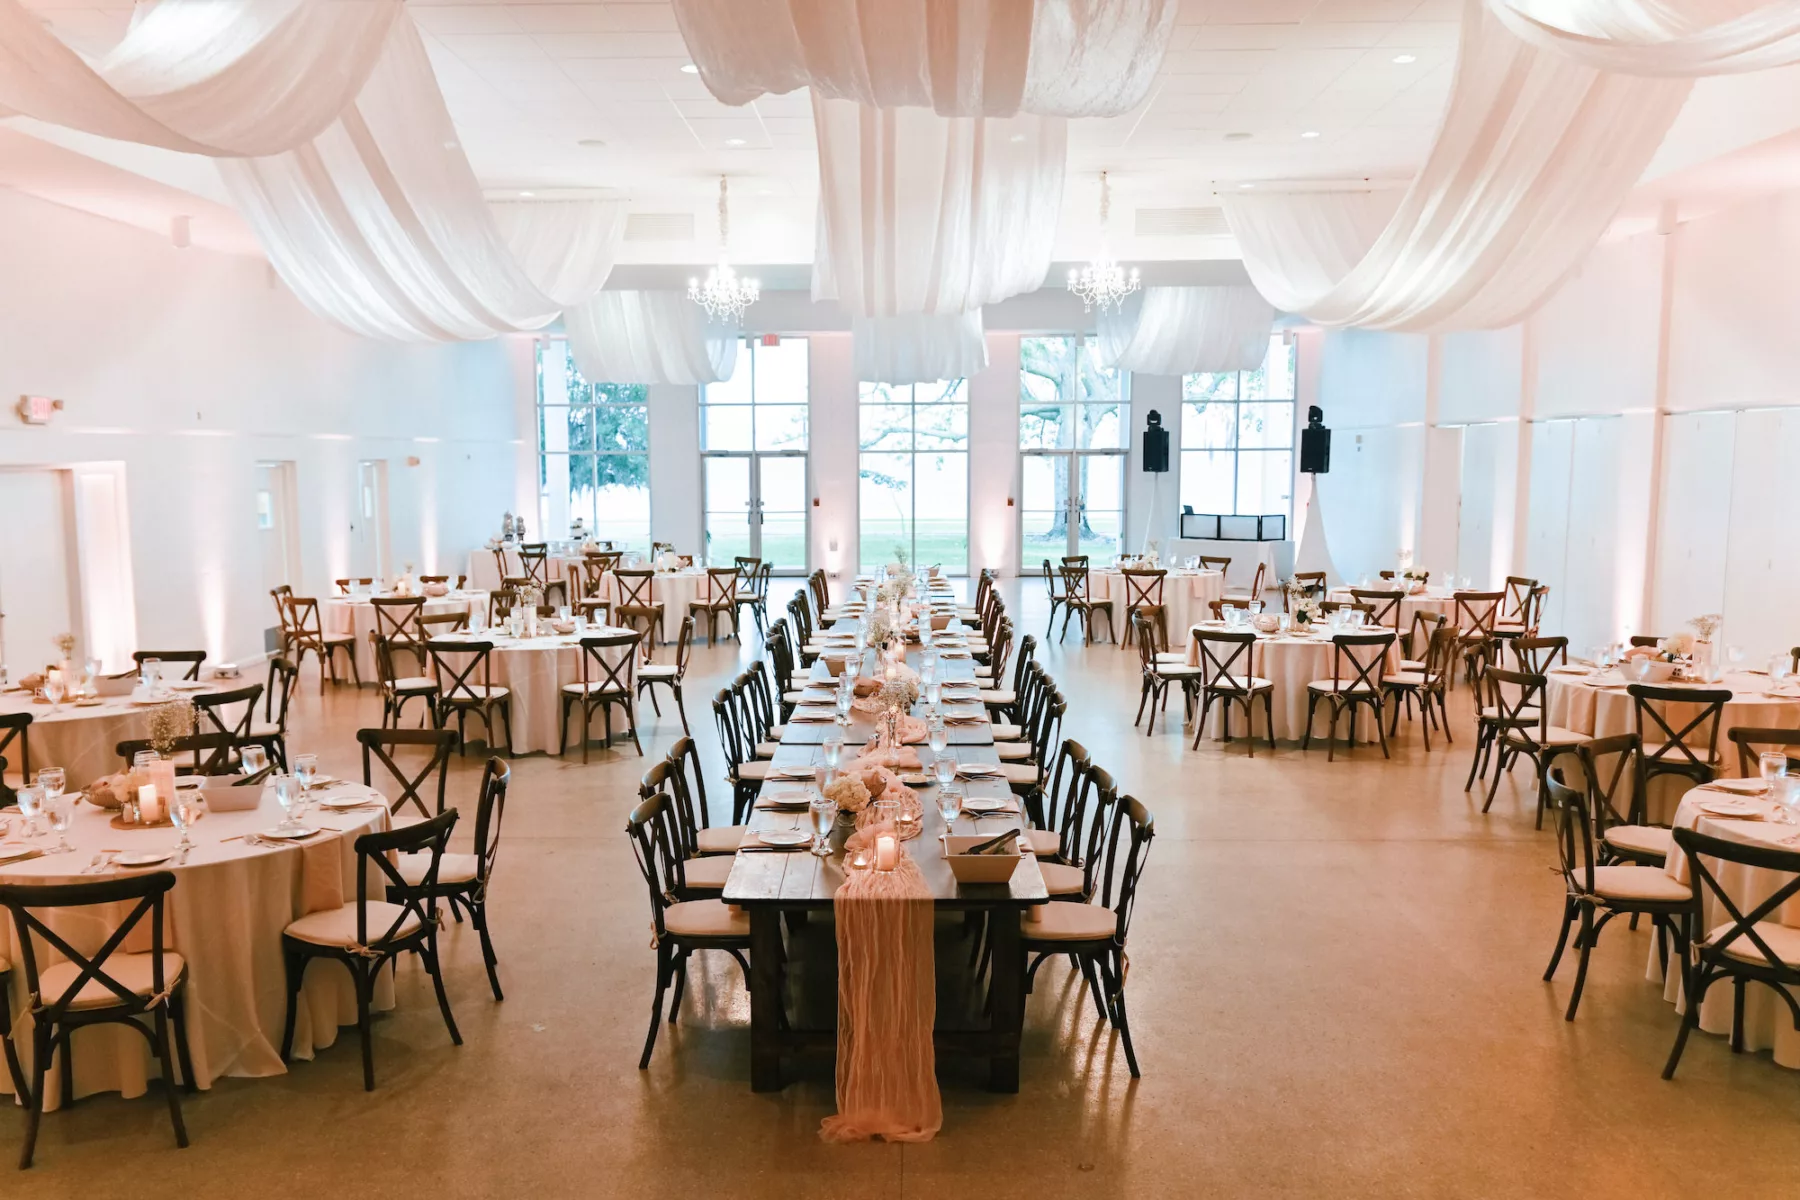 Neutral Vintage Indoor Wedding Reception Ideas | White Drapery, Wooden Crossback Chairs and Long Feasting Table Inspiration | Event Venue Tampa Garden Club